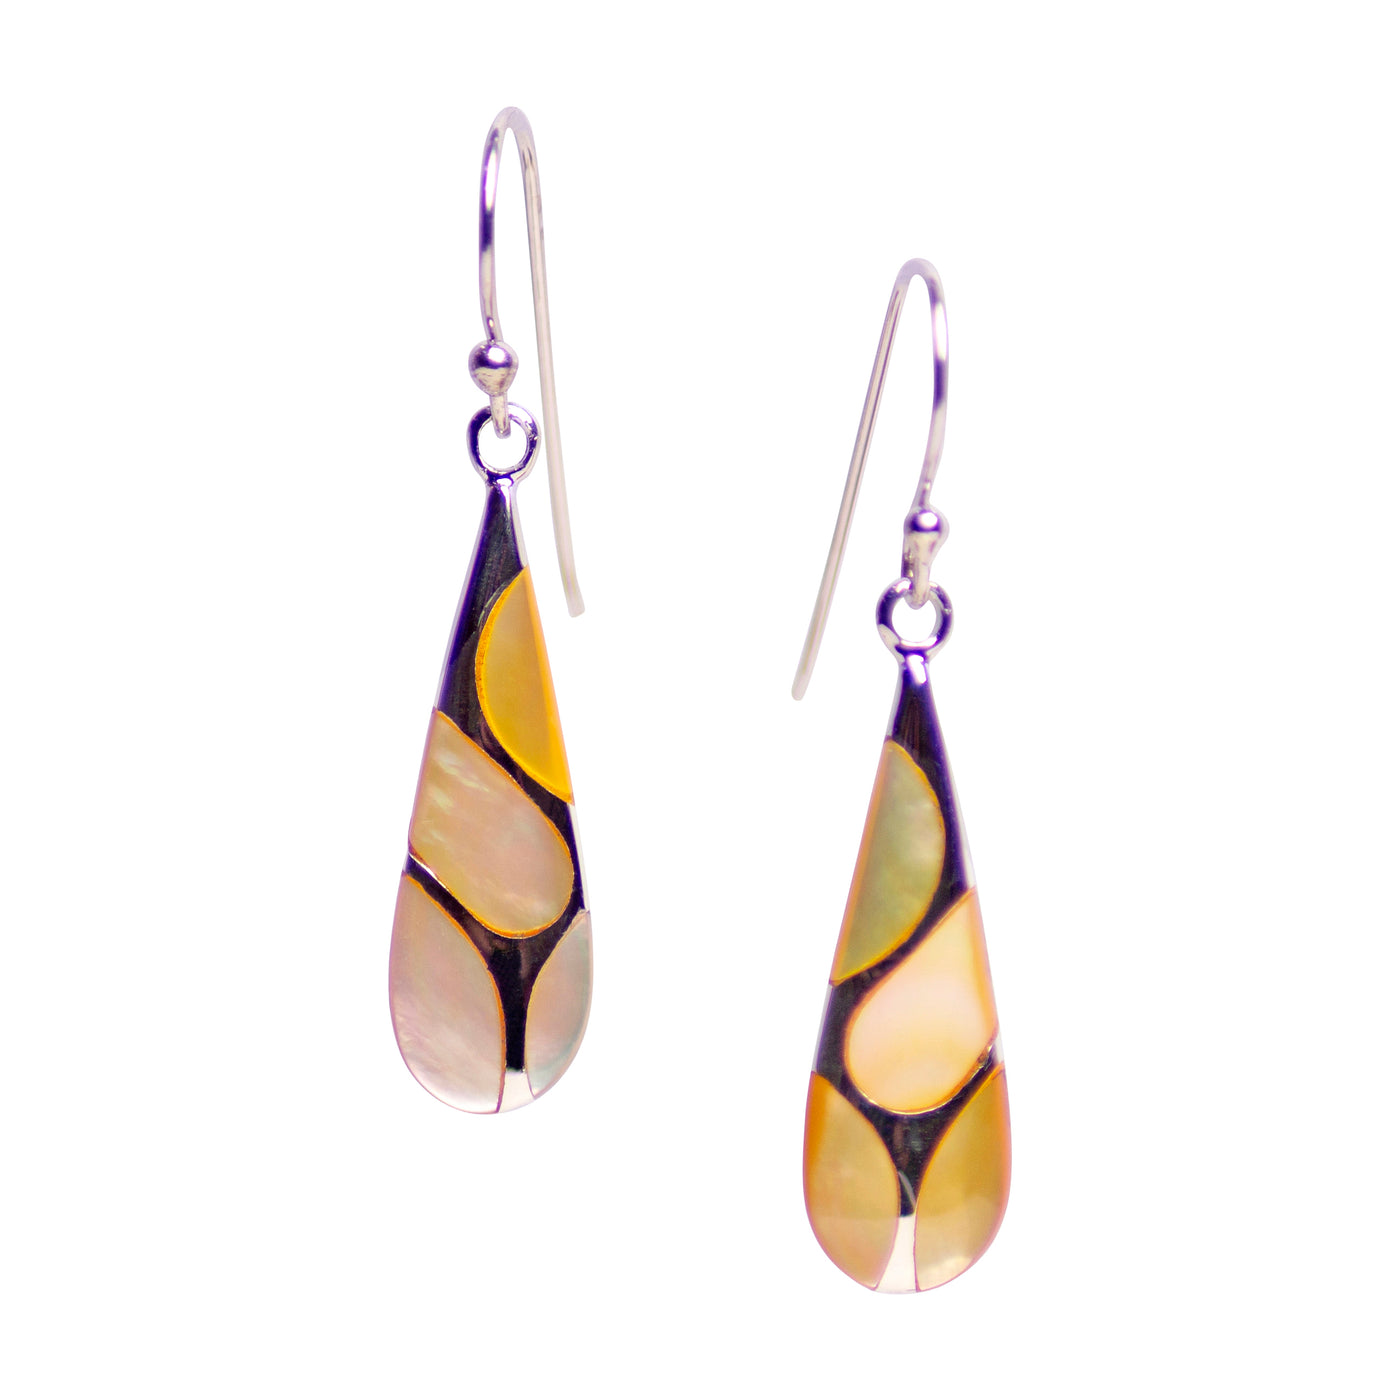 Gold Mother of Pearl Silver Earrings